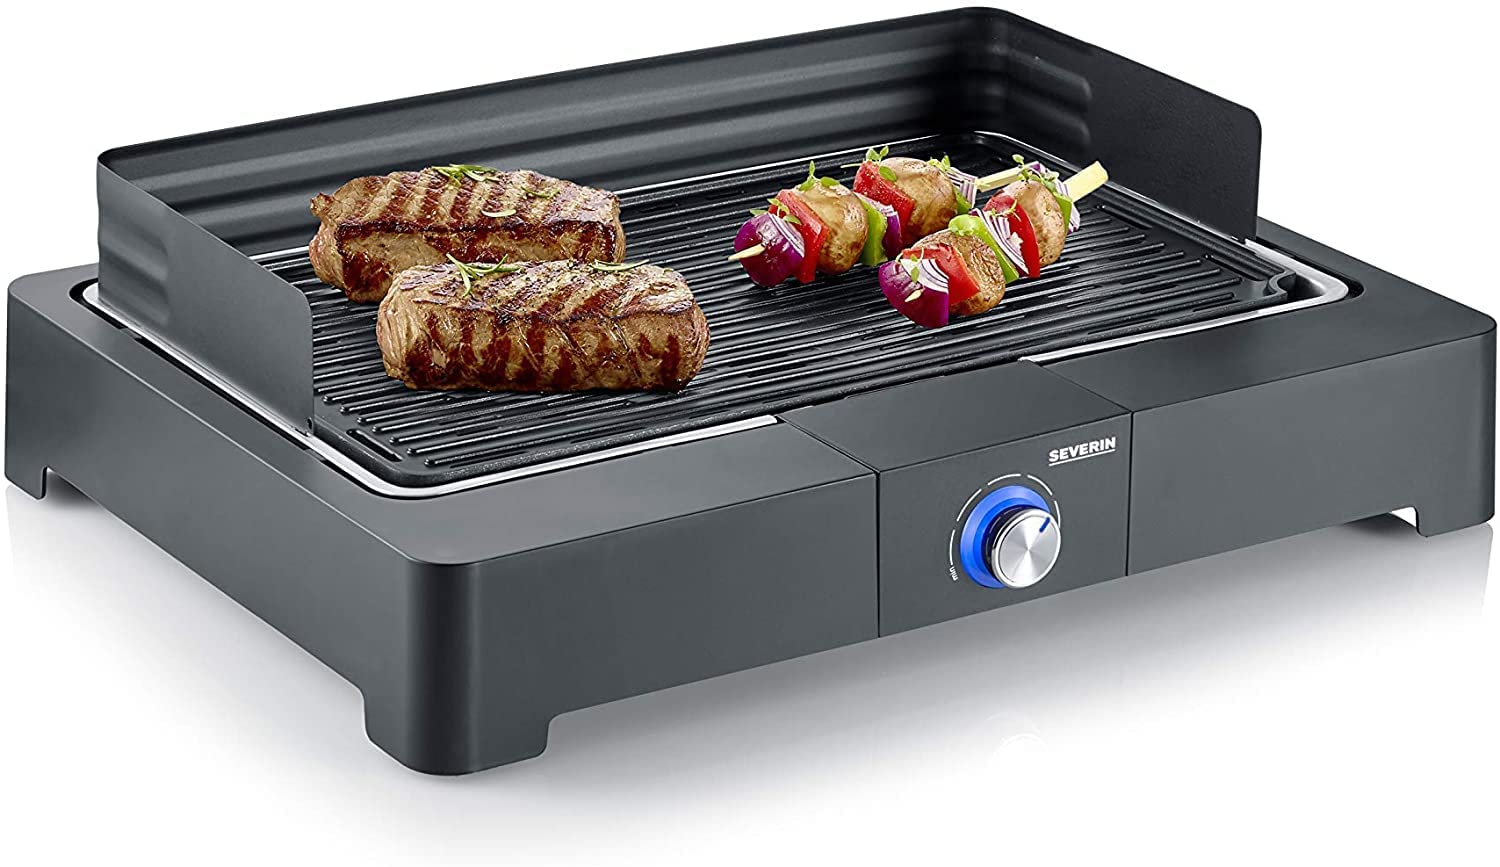 SEVERIN PG 8561 Standing Grill with Stainless Steel Grill, Black